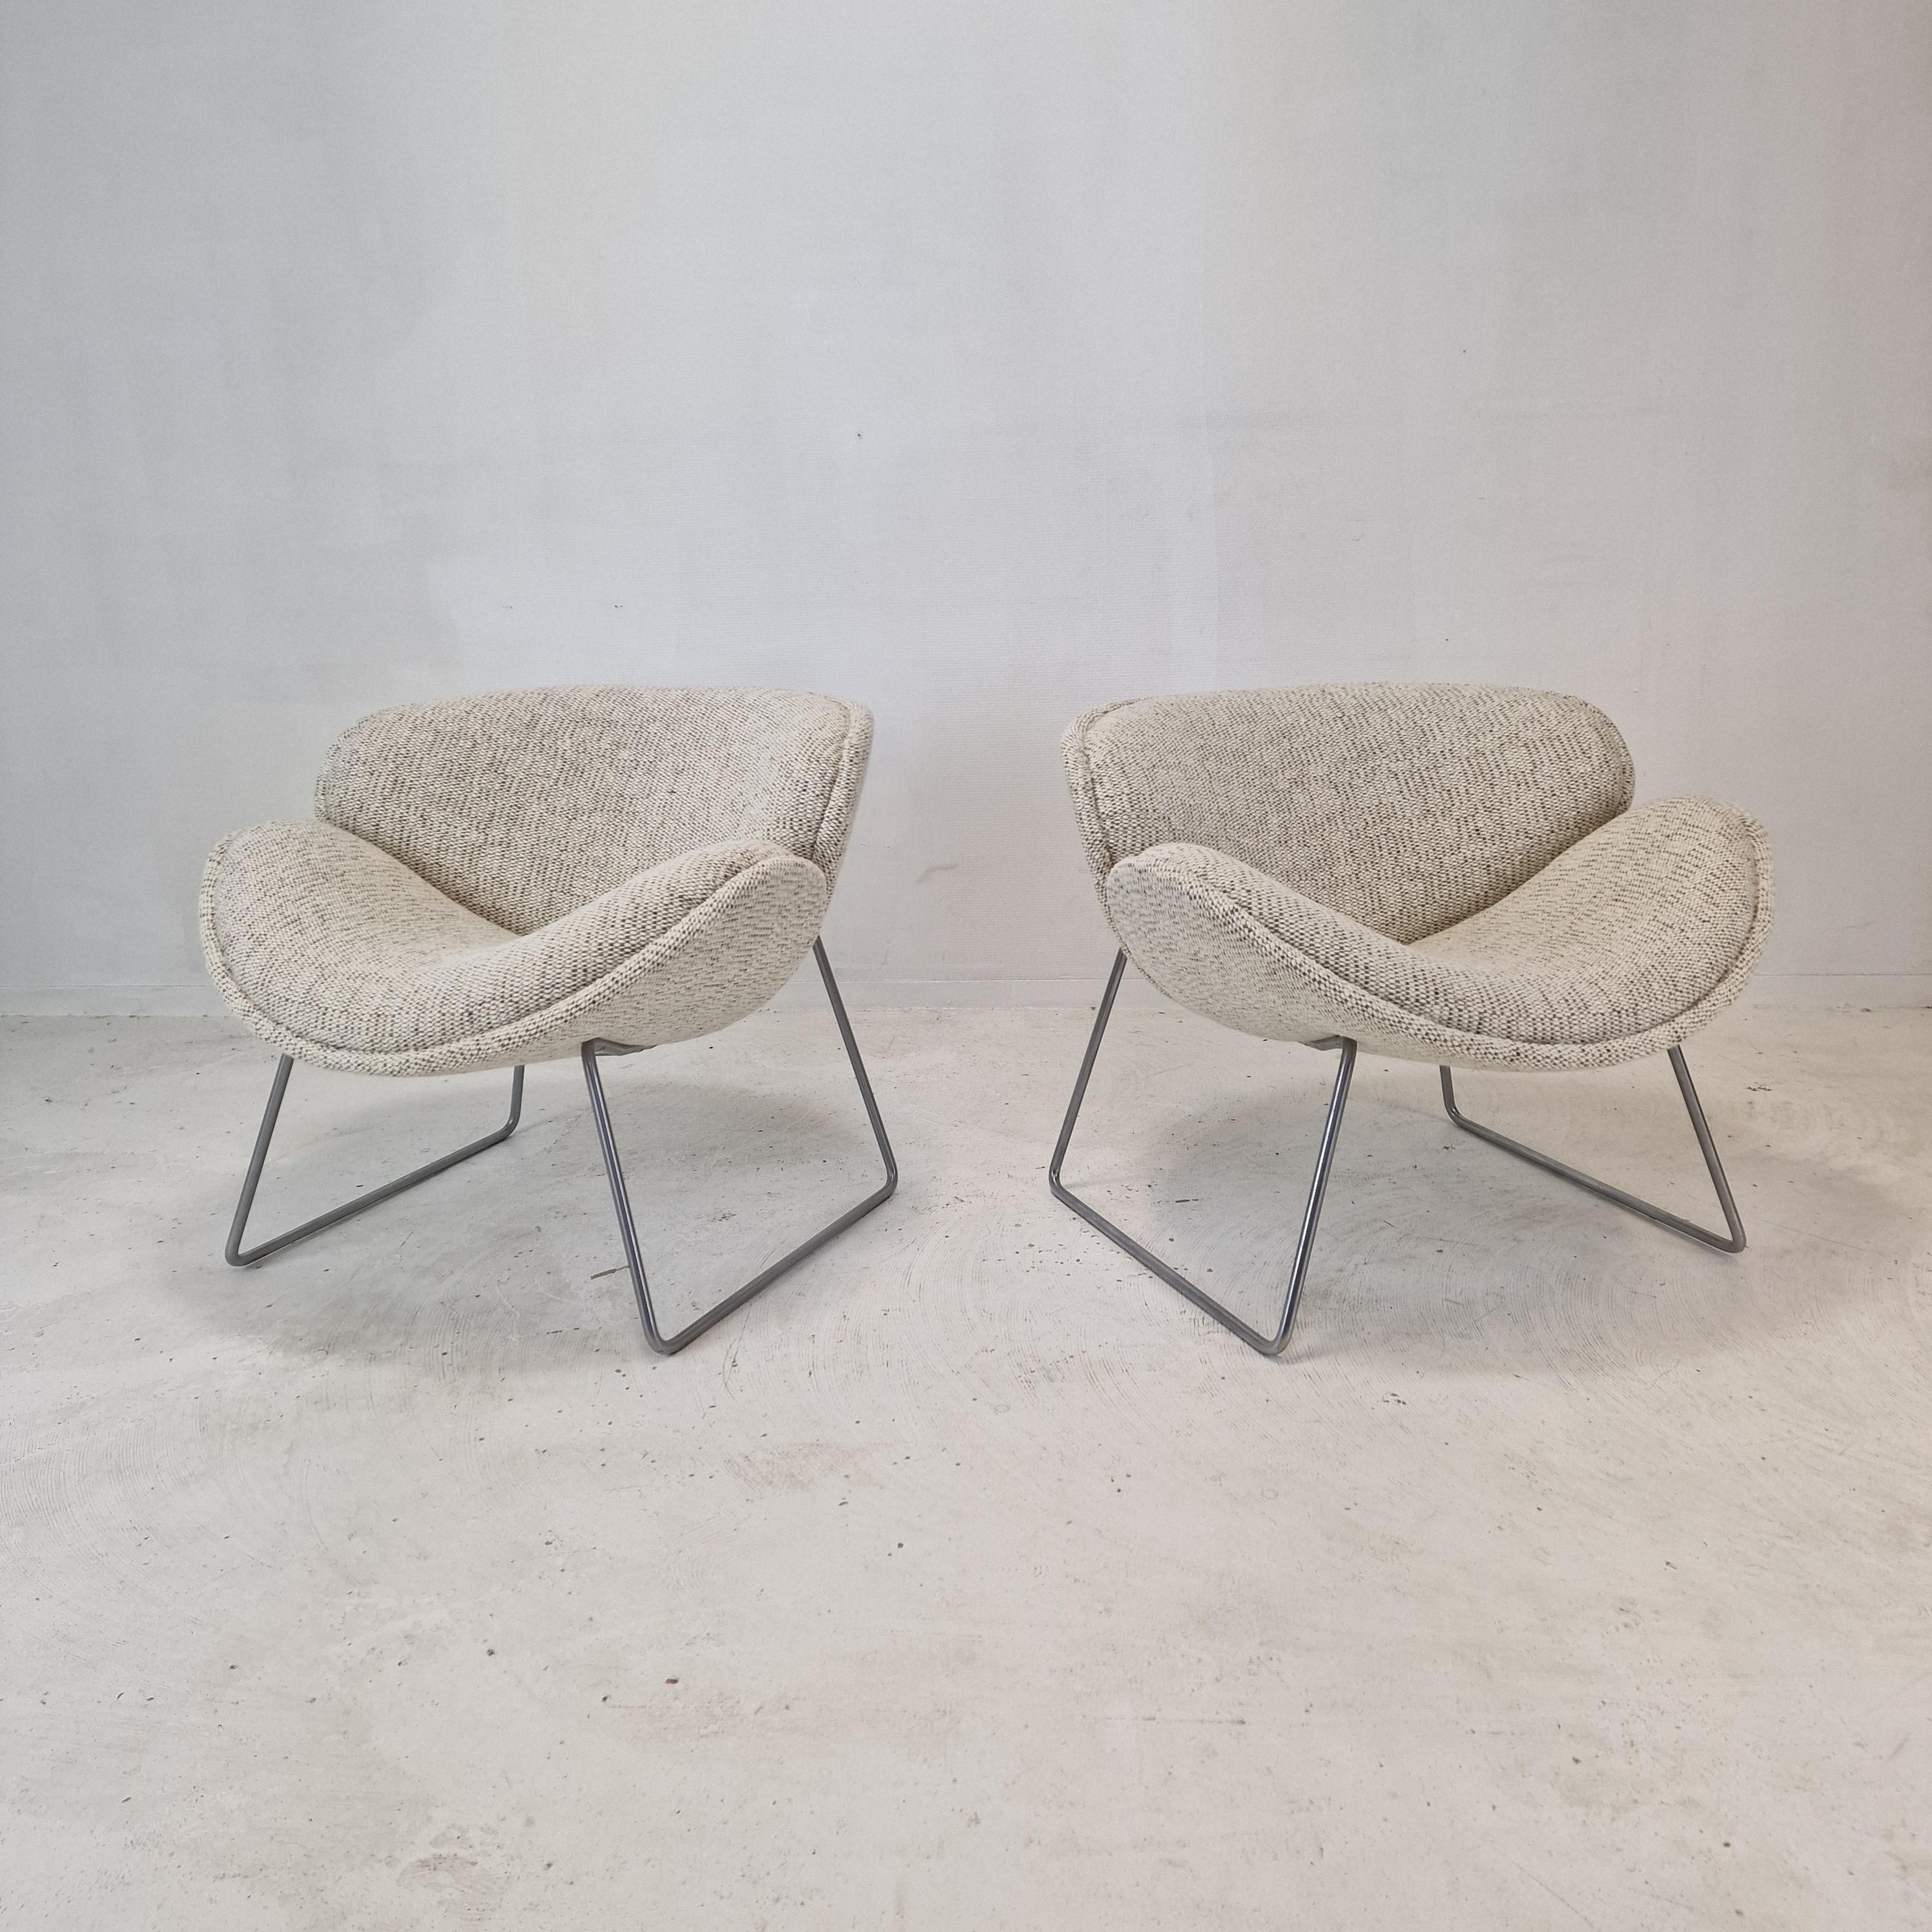 A beautiful set of the F438 Easy Chairs or Orange Slice Chairs.
This comfortable chair is designed in the late 1950's by Pierre Paulin for Artifort. 
This model was manufactured for a short period in the early 1960's as an anniversary, that's why it